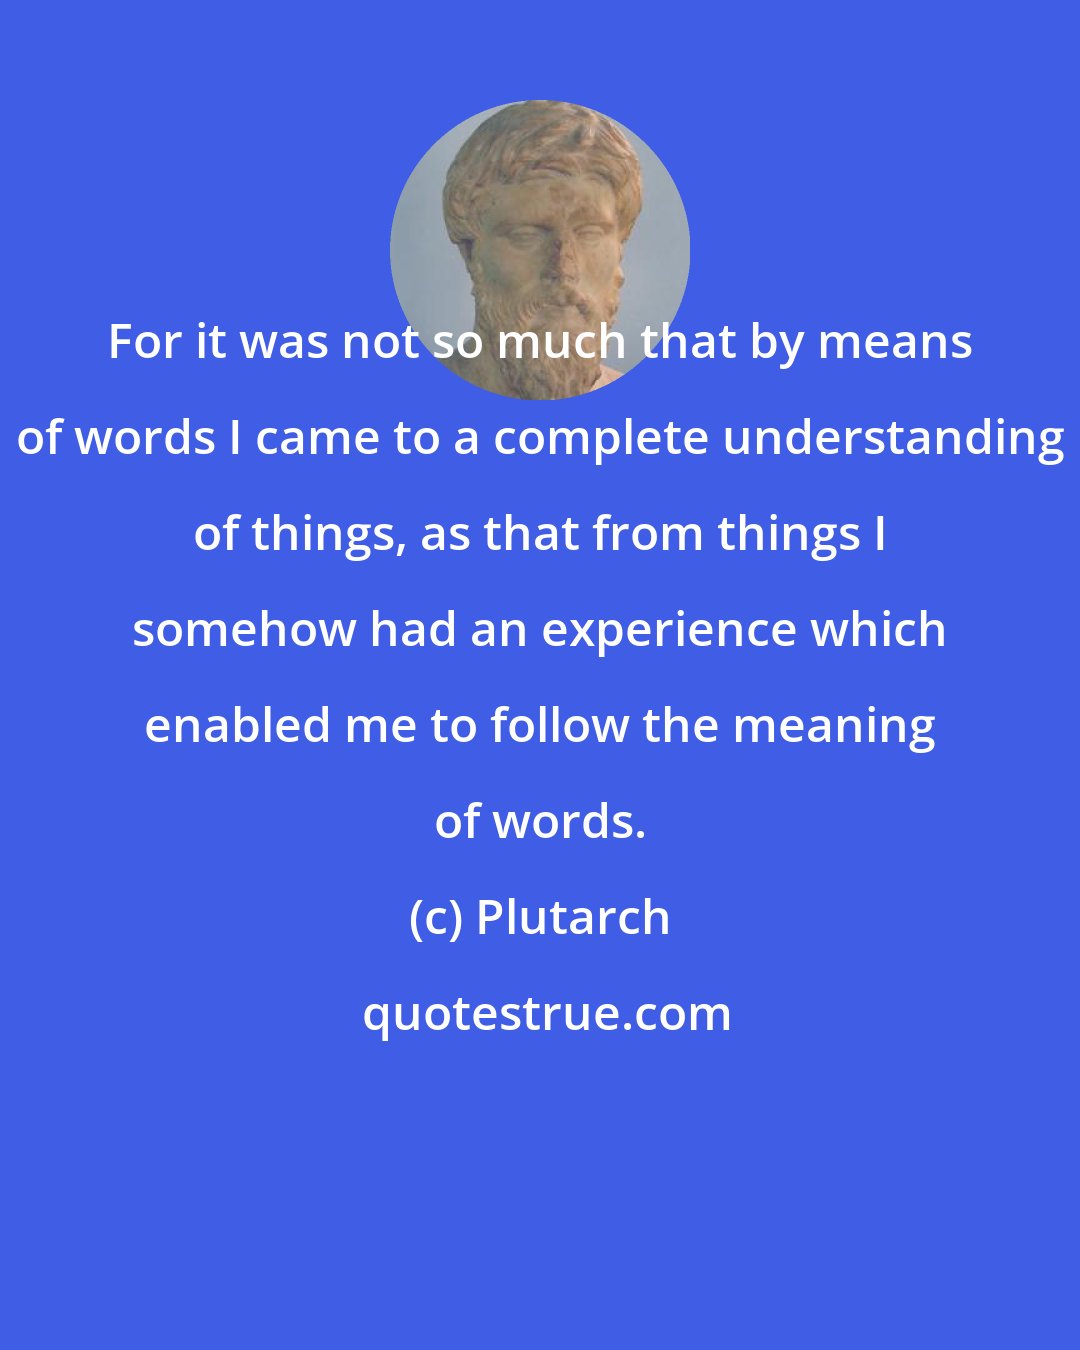 Plutarch: For it was not so much that by means of words I came to a complete understanding of things, as that from things I somehow had an experience which enabled me to follow the meaning of words.